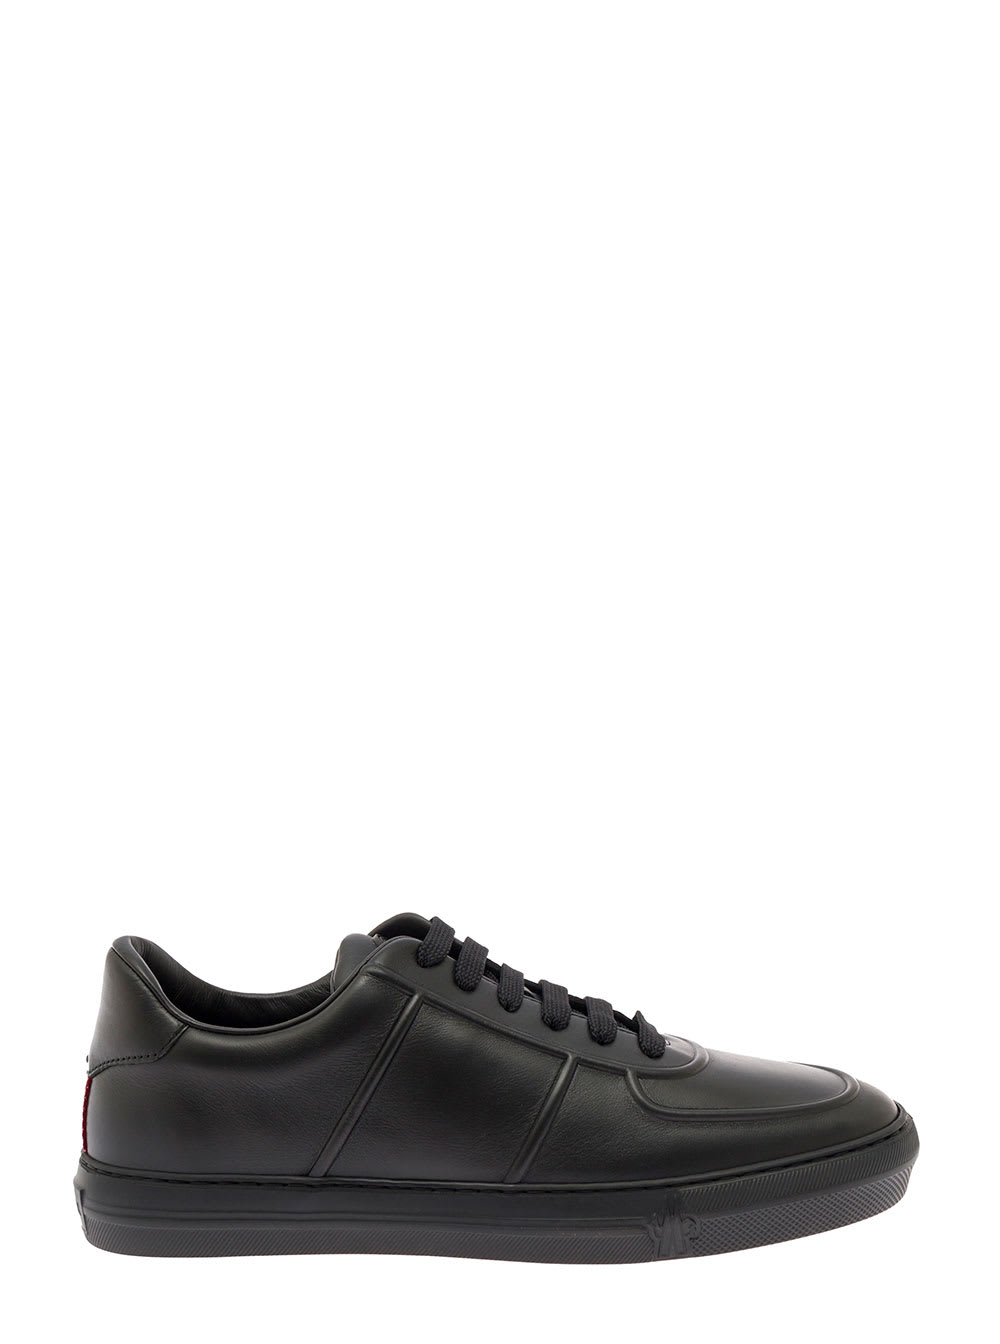 MONCLER NEW YORK BLACK LEATHER SNEAKER WITH LOGO MONCLER MAN